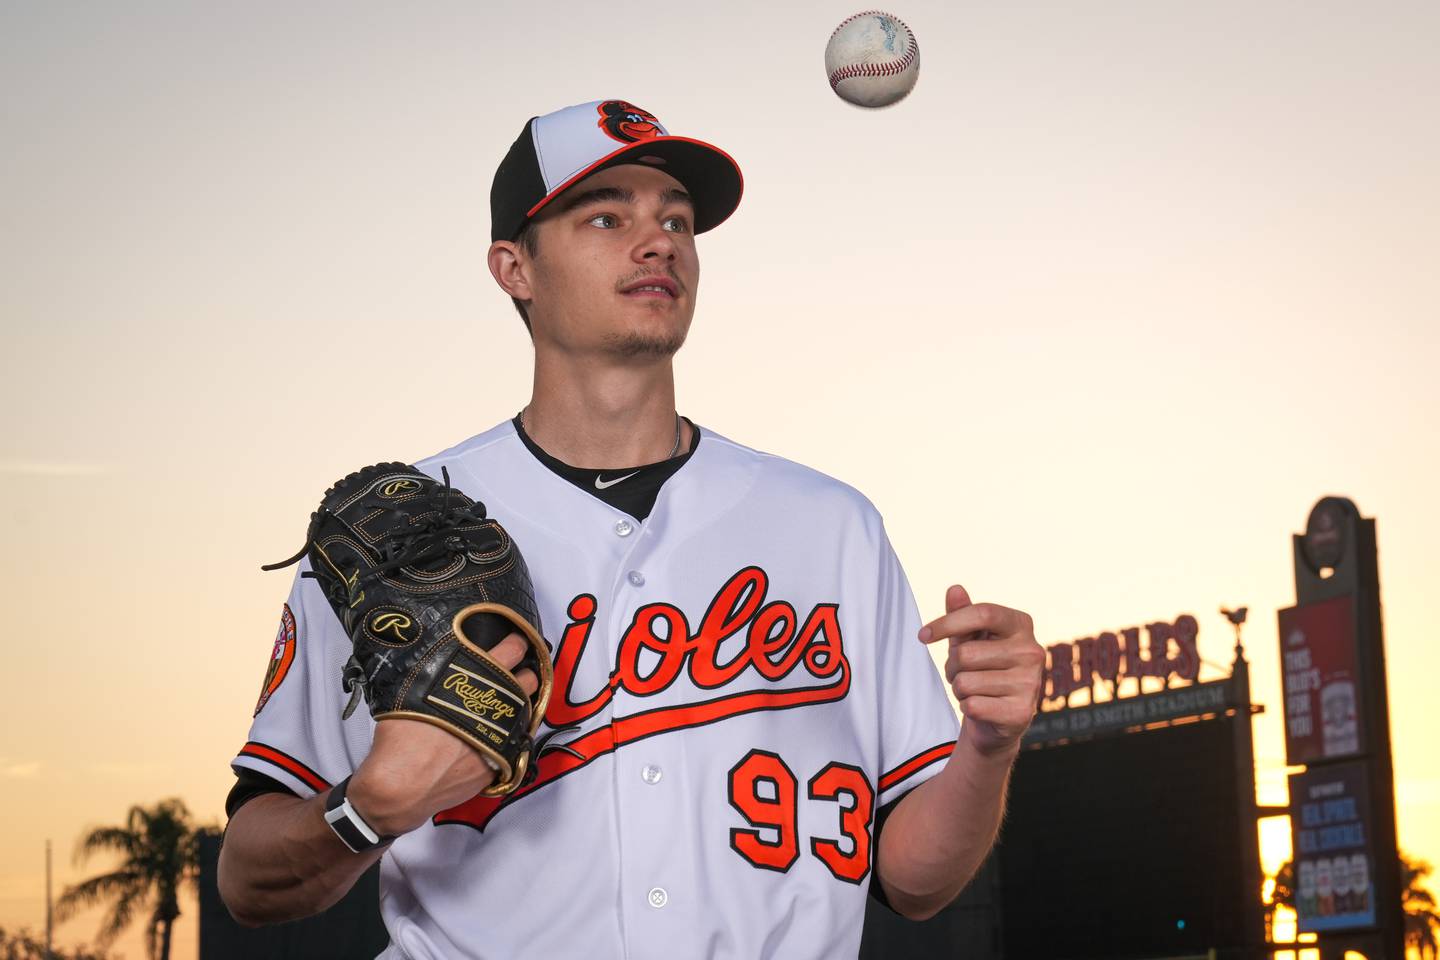 Cade Povich (93) poses for a portrait during Photo Day at Ed Smith Stadium in Sarasota on 2/23/23. The Baltimore Orioles’ Spring Training session runs from mid-February through the end of March.